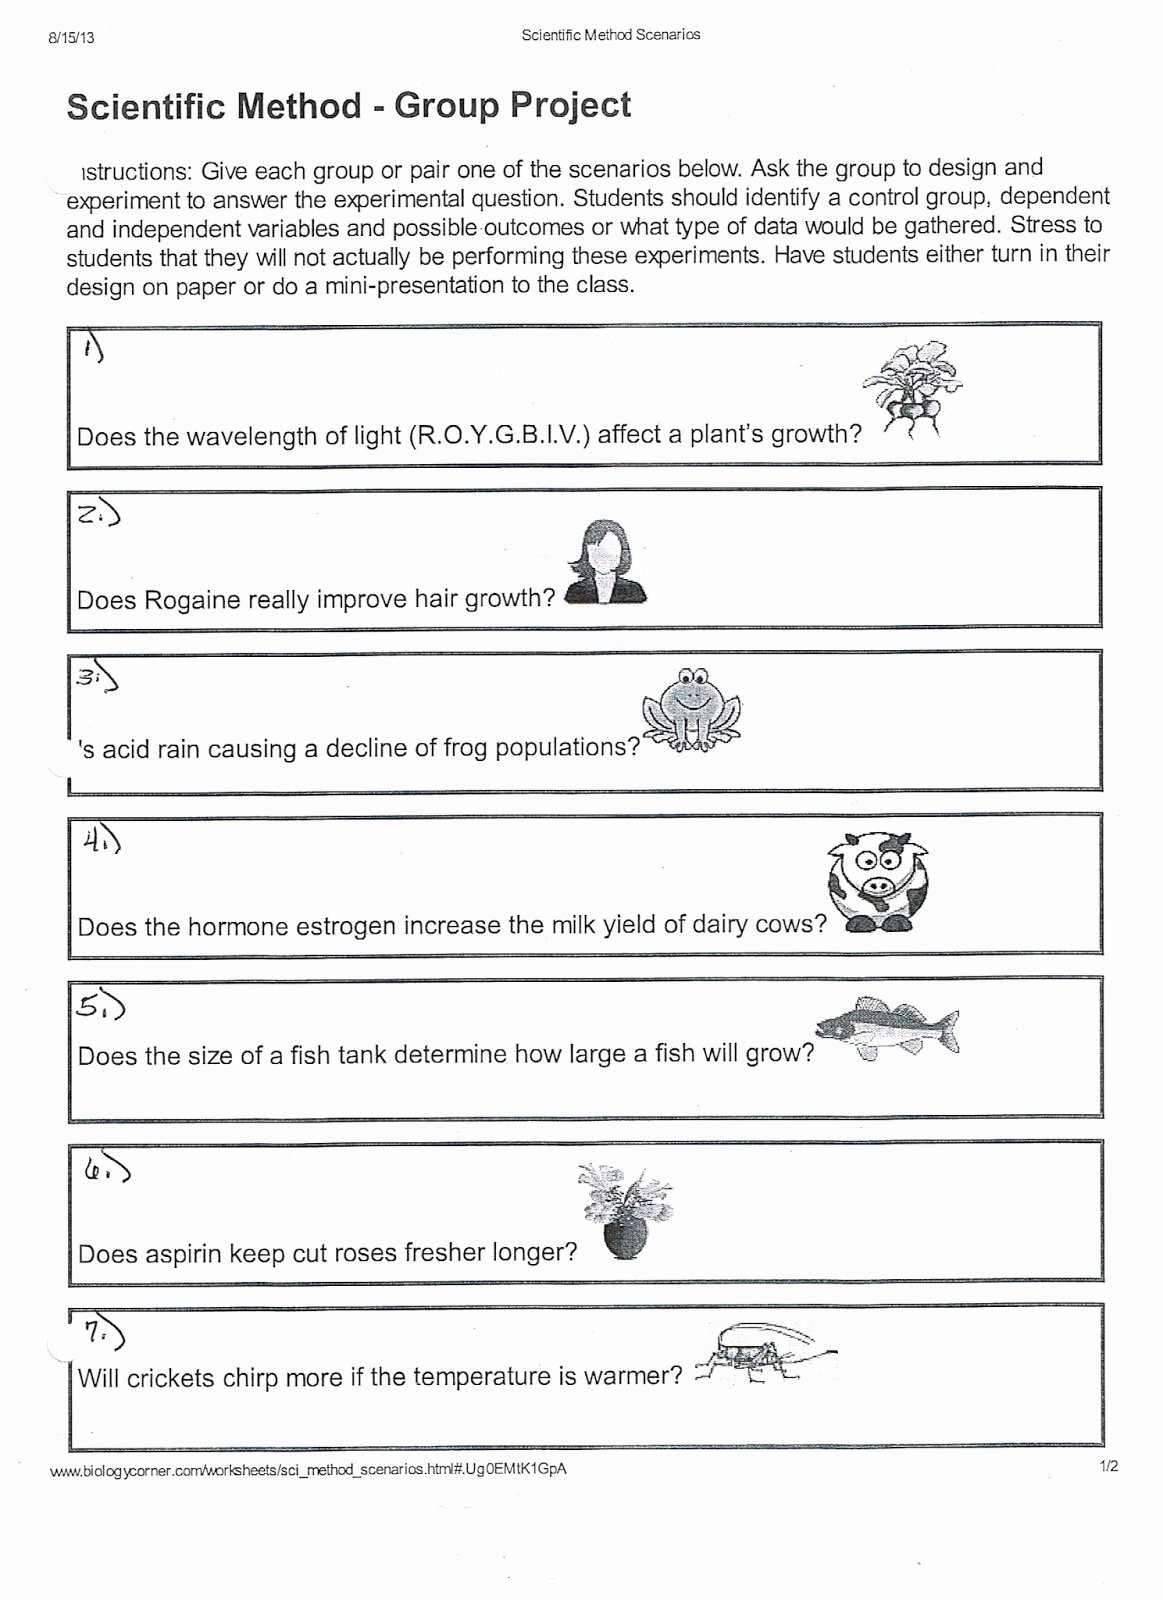 Designing An Experiment Worksheet New 56 Experimental Design Worksheet Experimental Design